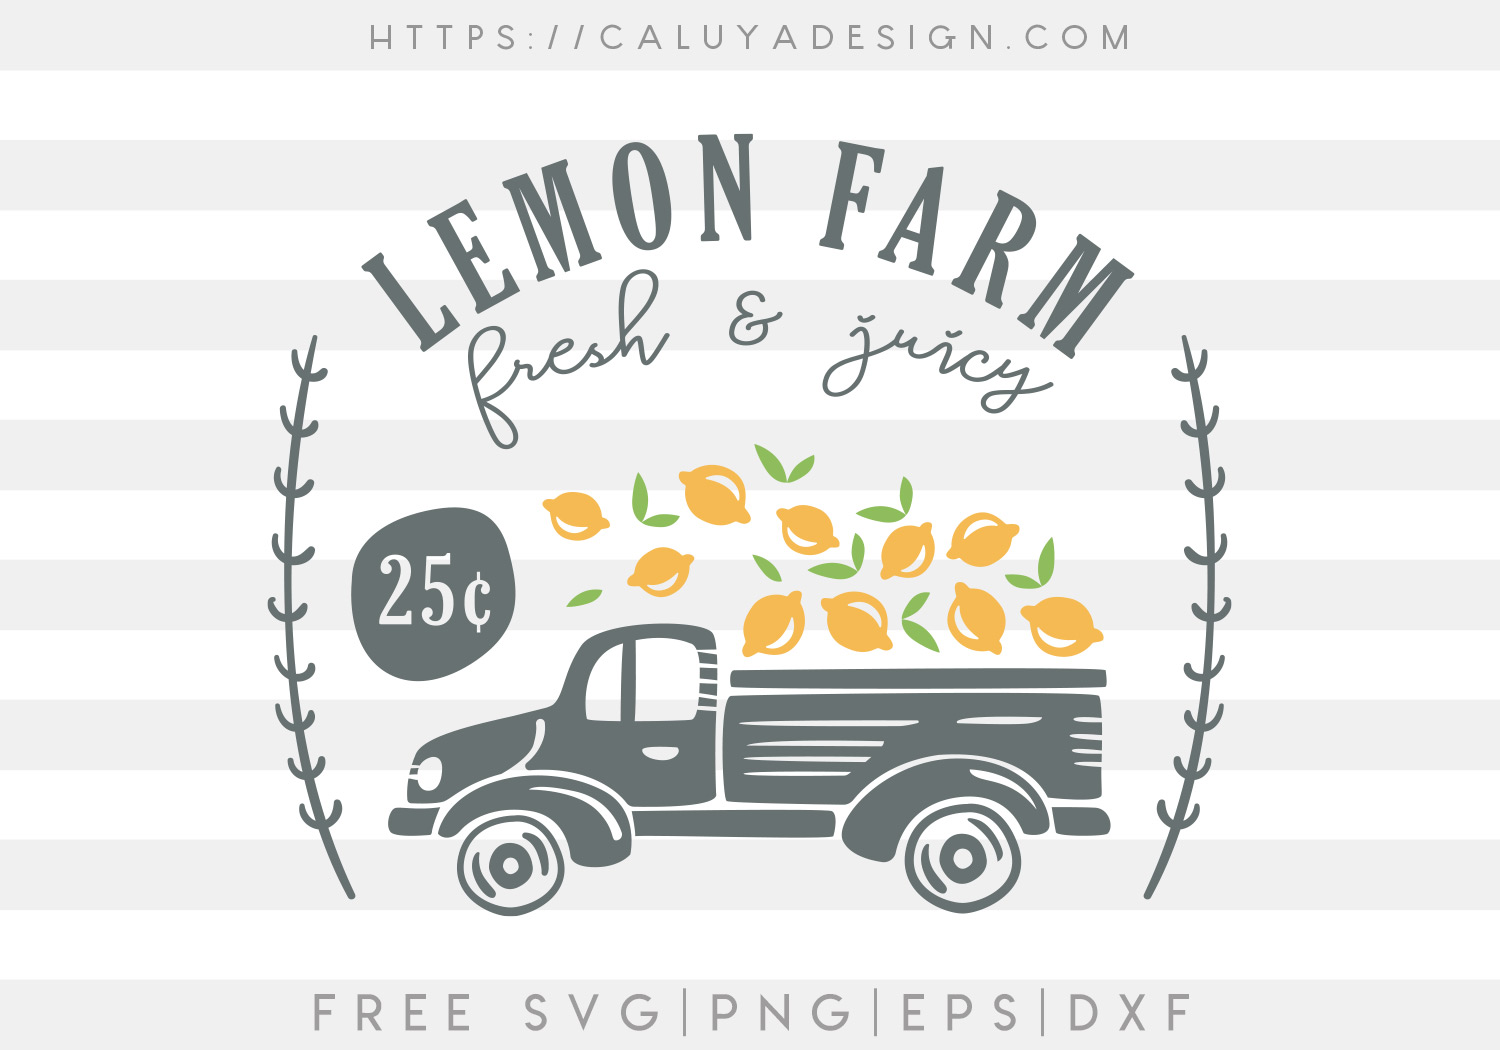 Free SVG & PNG Download Gallery by Caluya Design